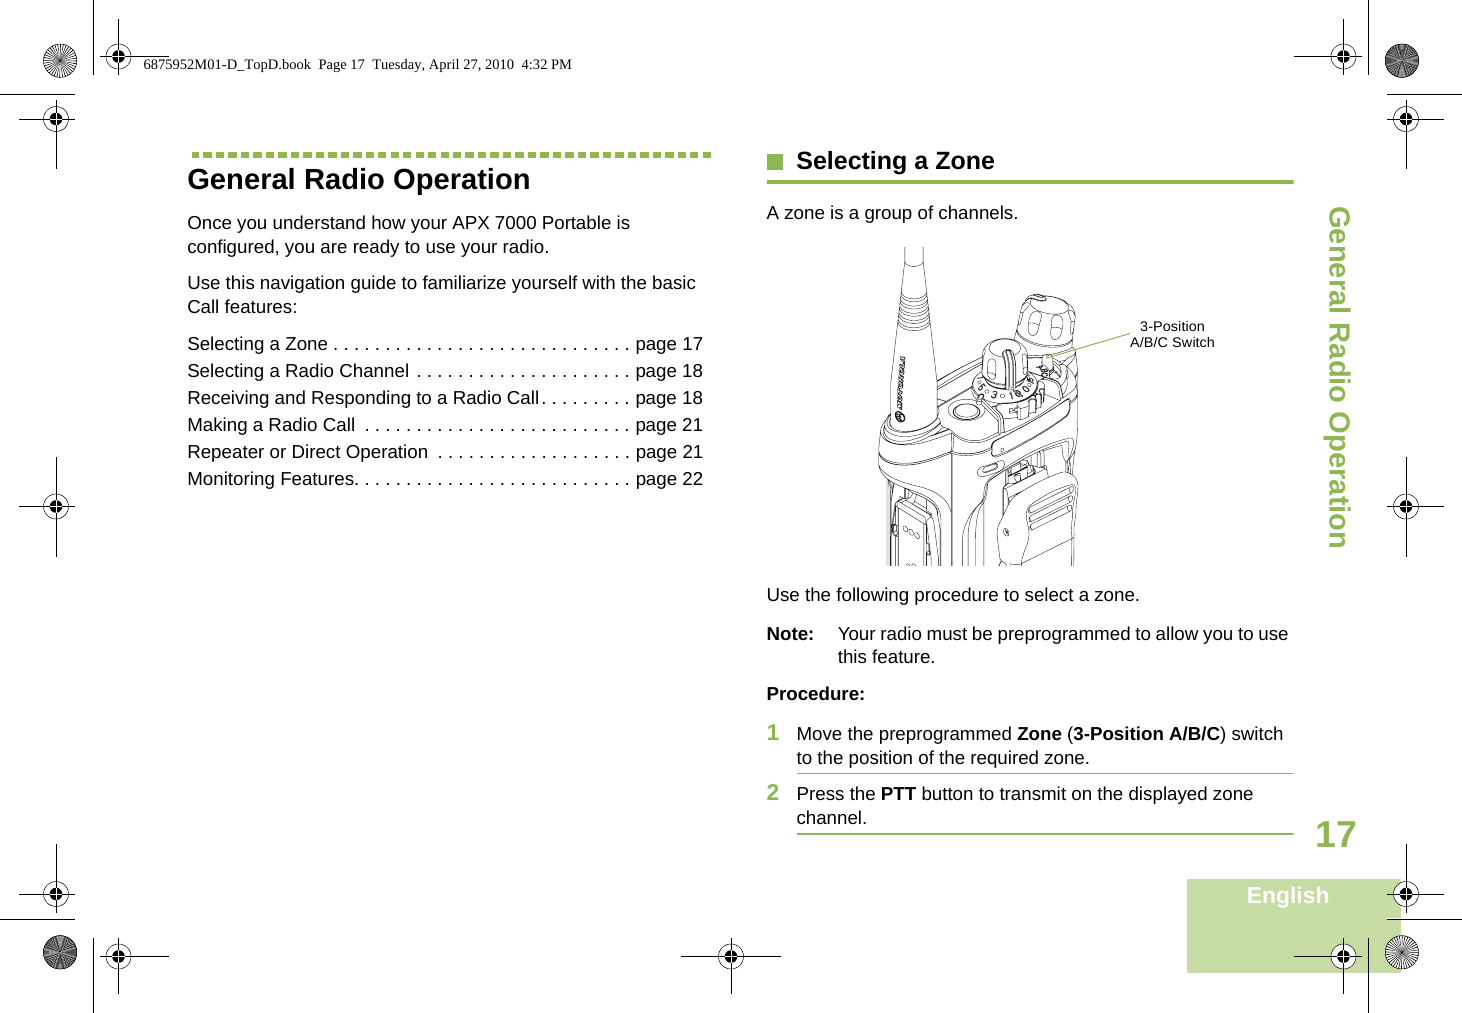 General Radio OperationEnglish17General Radio OperationOnce you understand how your APX 7000 Portable is configured, you are ready to use your radio.Use this navigation guide to familiarize yourself with the basic Call features:Selecting a Zone . . . . . . . . . . . . . . . . . . . . . . . . . . . . . page 17Selecting a Radio Channel . . . . . . . . . . . . . . . . . . . . . page 18Receiving and Responding to a Radio Call. . . . . . . . . page 18Making a Radio Call  . . . . . . . . . . . . . . . . . . . . . . . . . . page 21Repeater or Direct Operation  . . . . . . . . . . . . . . . . . . . page 21Monitoring Features. . . . . . . . . . . . . . . . . . . . . . . . . . . page 22Selecting a ZoneA zone is a group of channels.Use the following procedure to select a zone.Note: Your radio must be preprogrammed to allow you to use this feature.Procedure:1Move the preprogrammed Zone (3-Position A/B/C) switch to the position of the required zone.2Press the PTT button to transmit on the displayed zone channel.  3-Position A/B/C Switch6875952M01-D_TopD.book  Page 17  Tuesday, April 27, 2010  4:32 PM